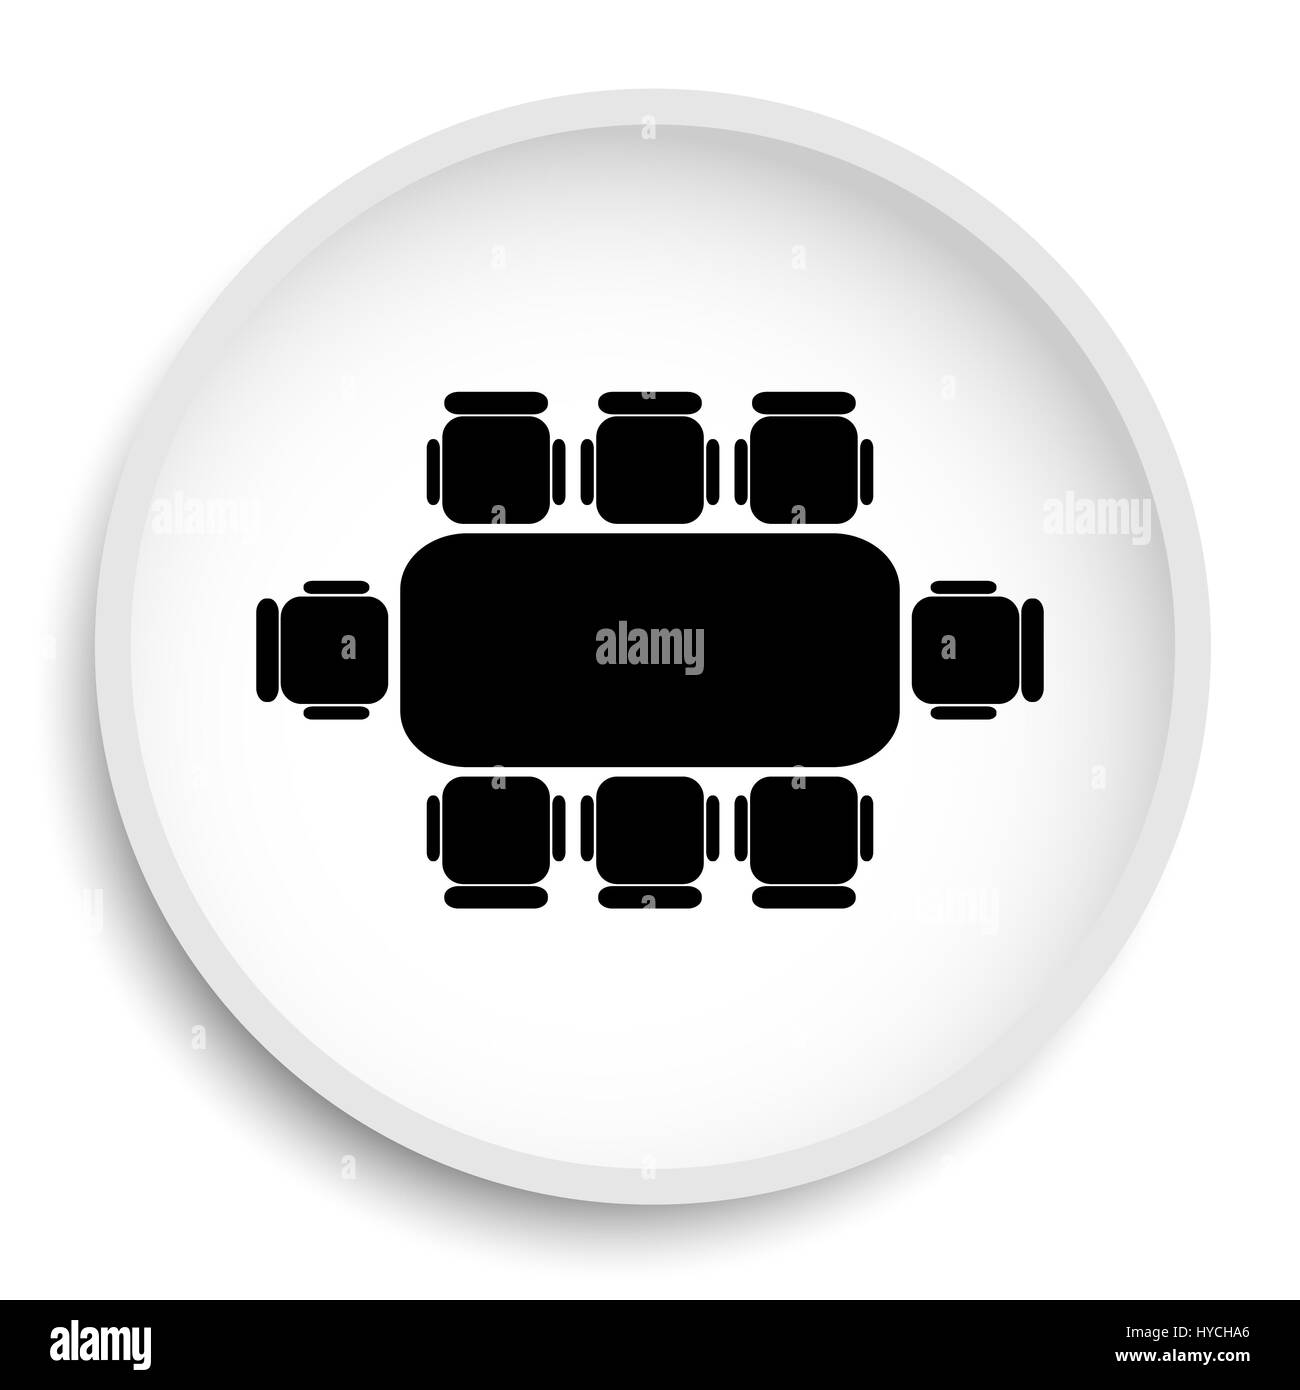 Business meeting table icon. Business meeting table website button on white background. Stock Photo